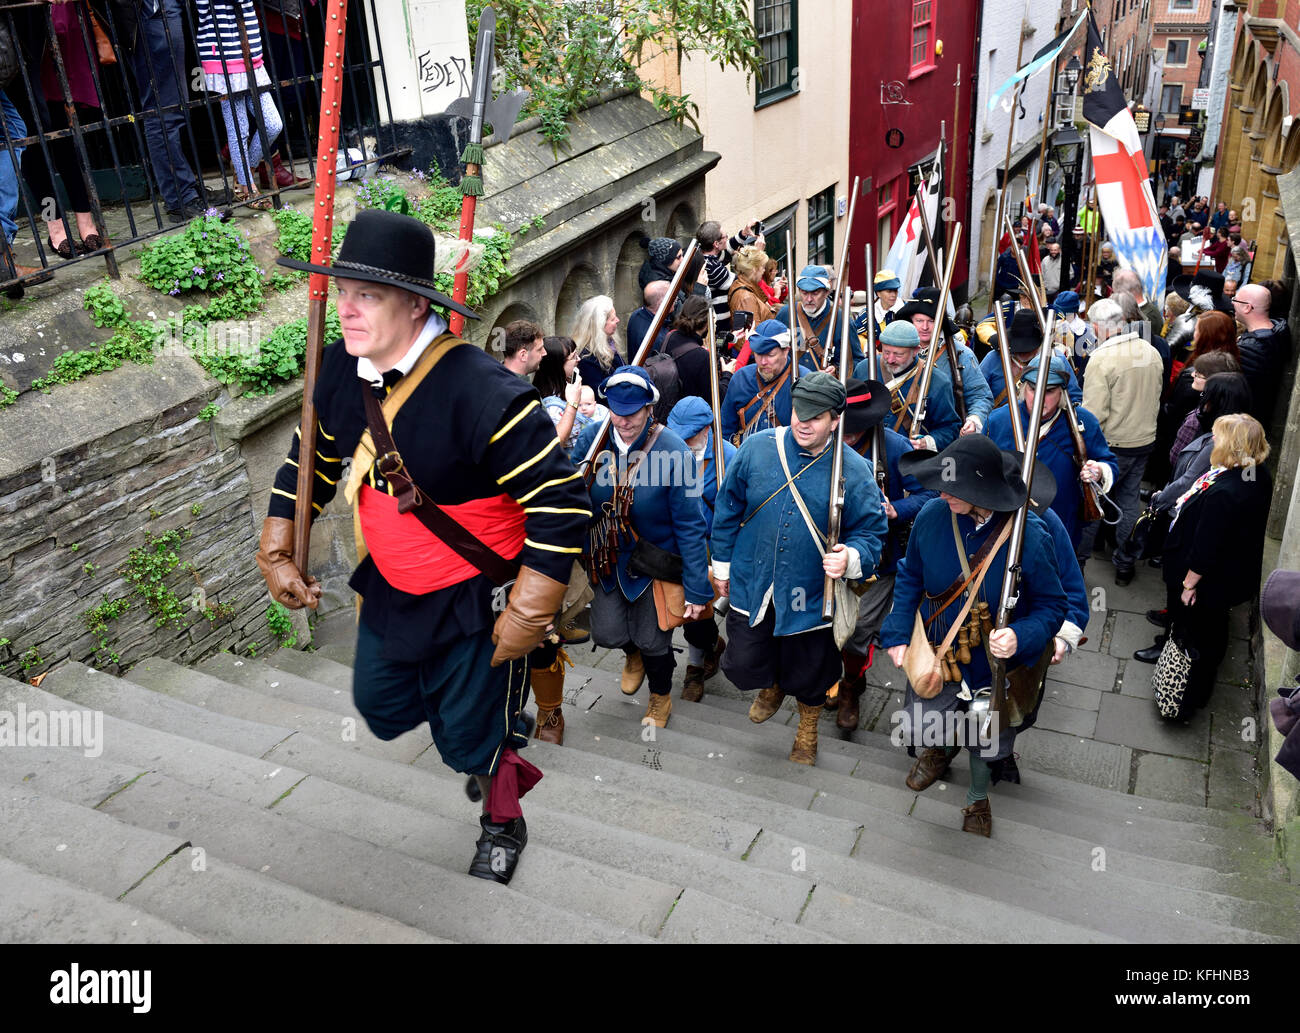 Bristol, UK. 29th Oct, 2017. During the English Civil War, 374 years ago, the attacking Royalists broke through the Parliamentarian outer Bristol defences and stormed down Christmas Steps to attack Froome Gate which defended the St. John's entrance to the walled city of Bristol. The re-enactment of this battle is being held over two days, Sat. Sun, 28 and 29 October, 2017 around the streets at the top of Christmas Steps in central Bristol, UK, A ceremony with city dignitaries will be held for a dedication plaque replacement held on the Sunday. Credit: Charles Stirling/Alamy Live News Stock Photo